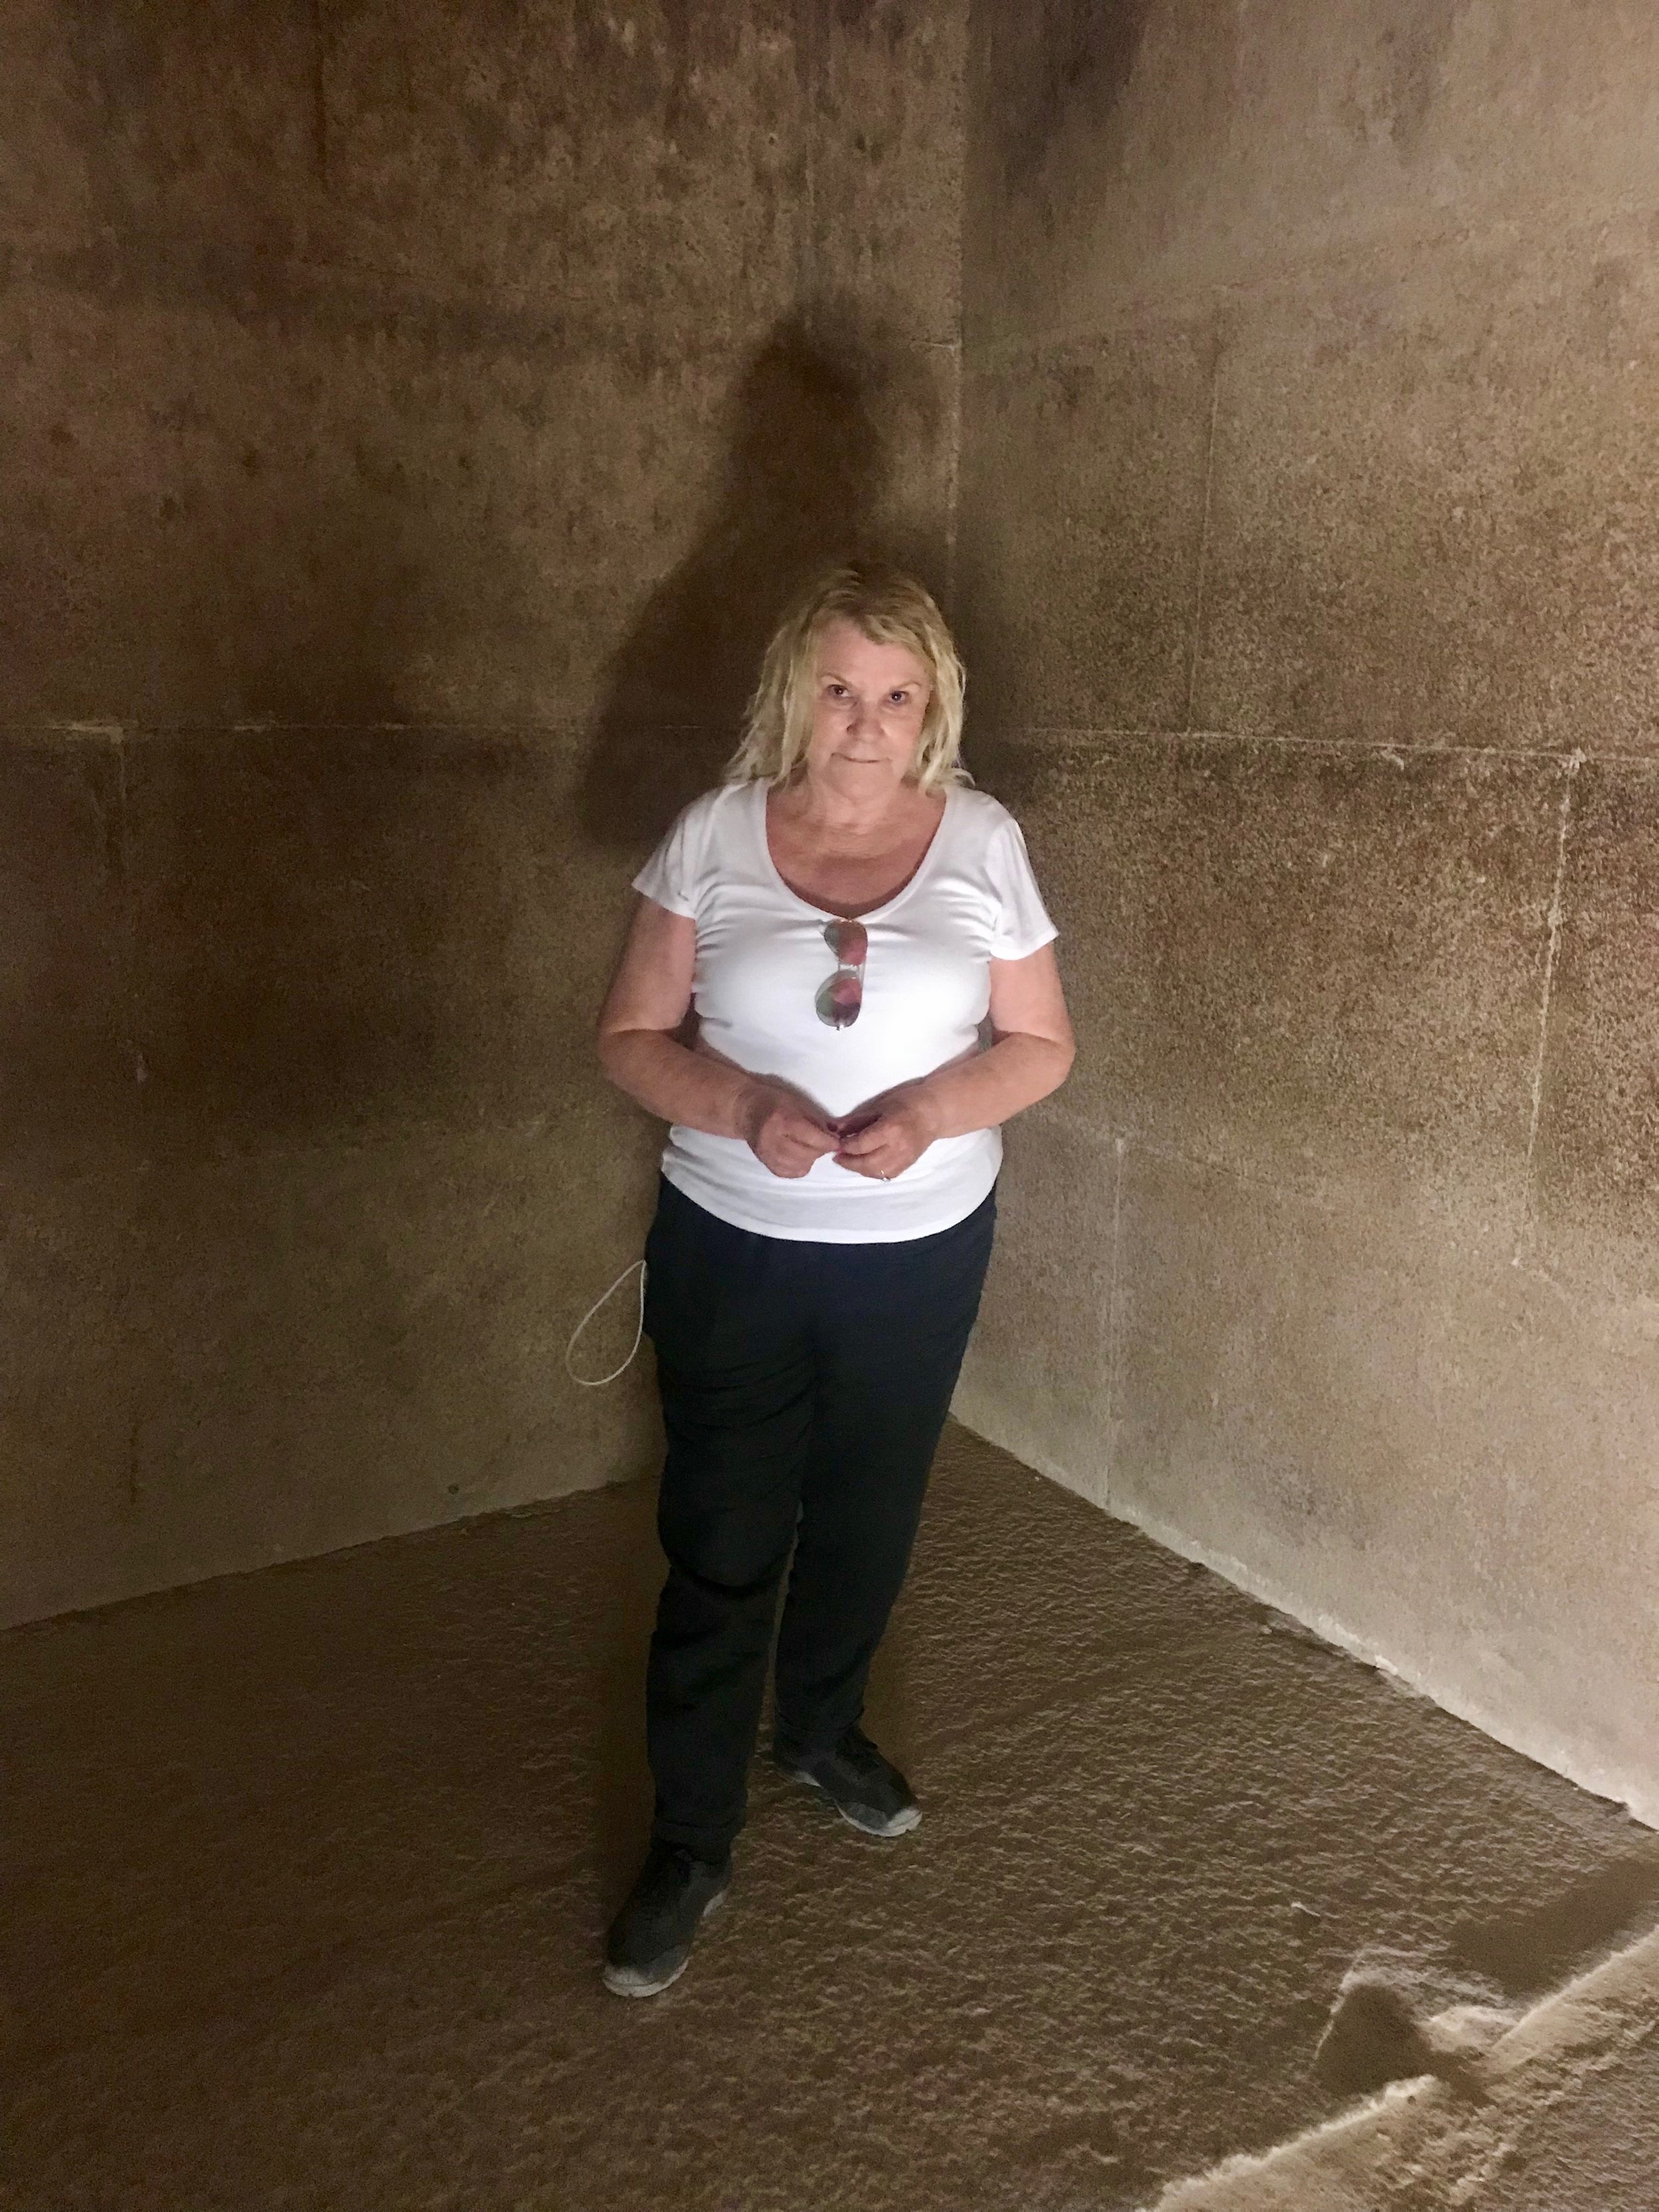 February 2018 in the Burial Chamber of the Third Pyramid, Giza Plateau